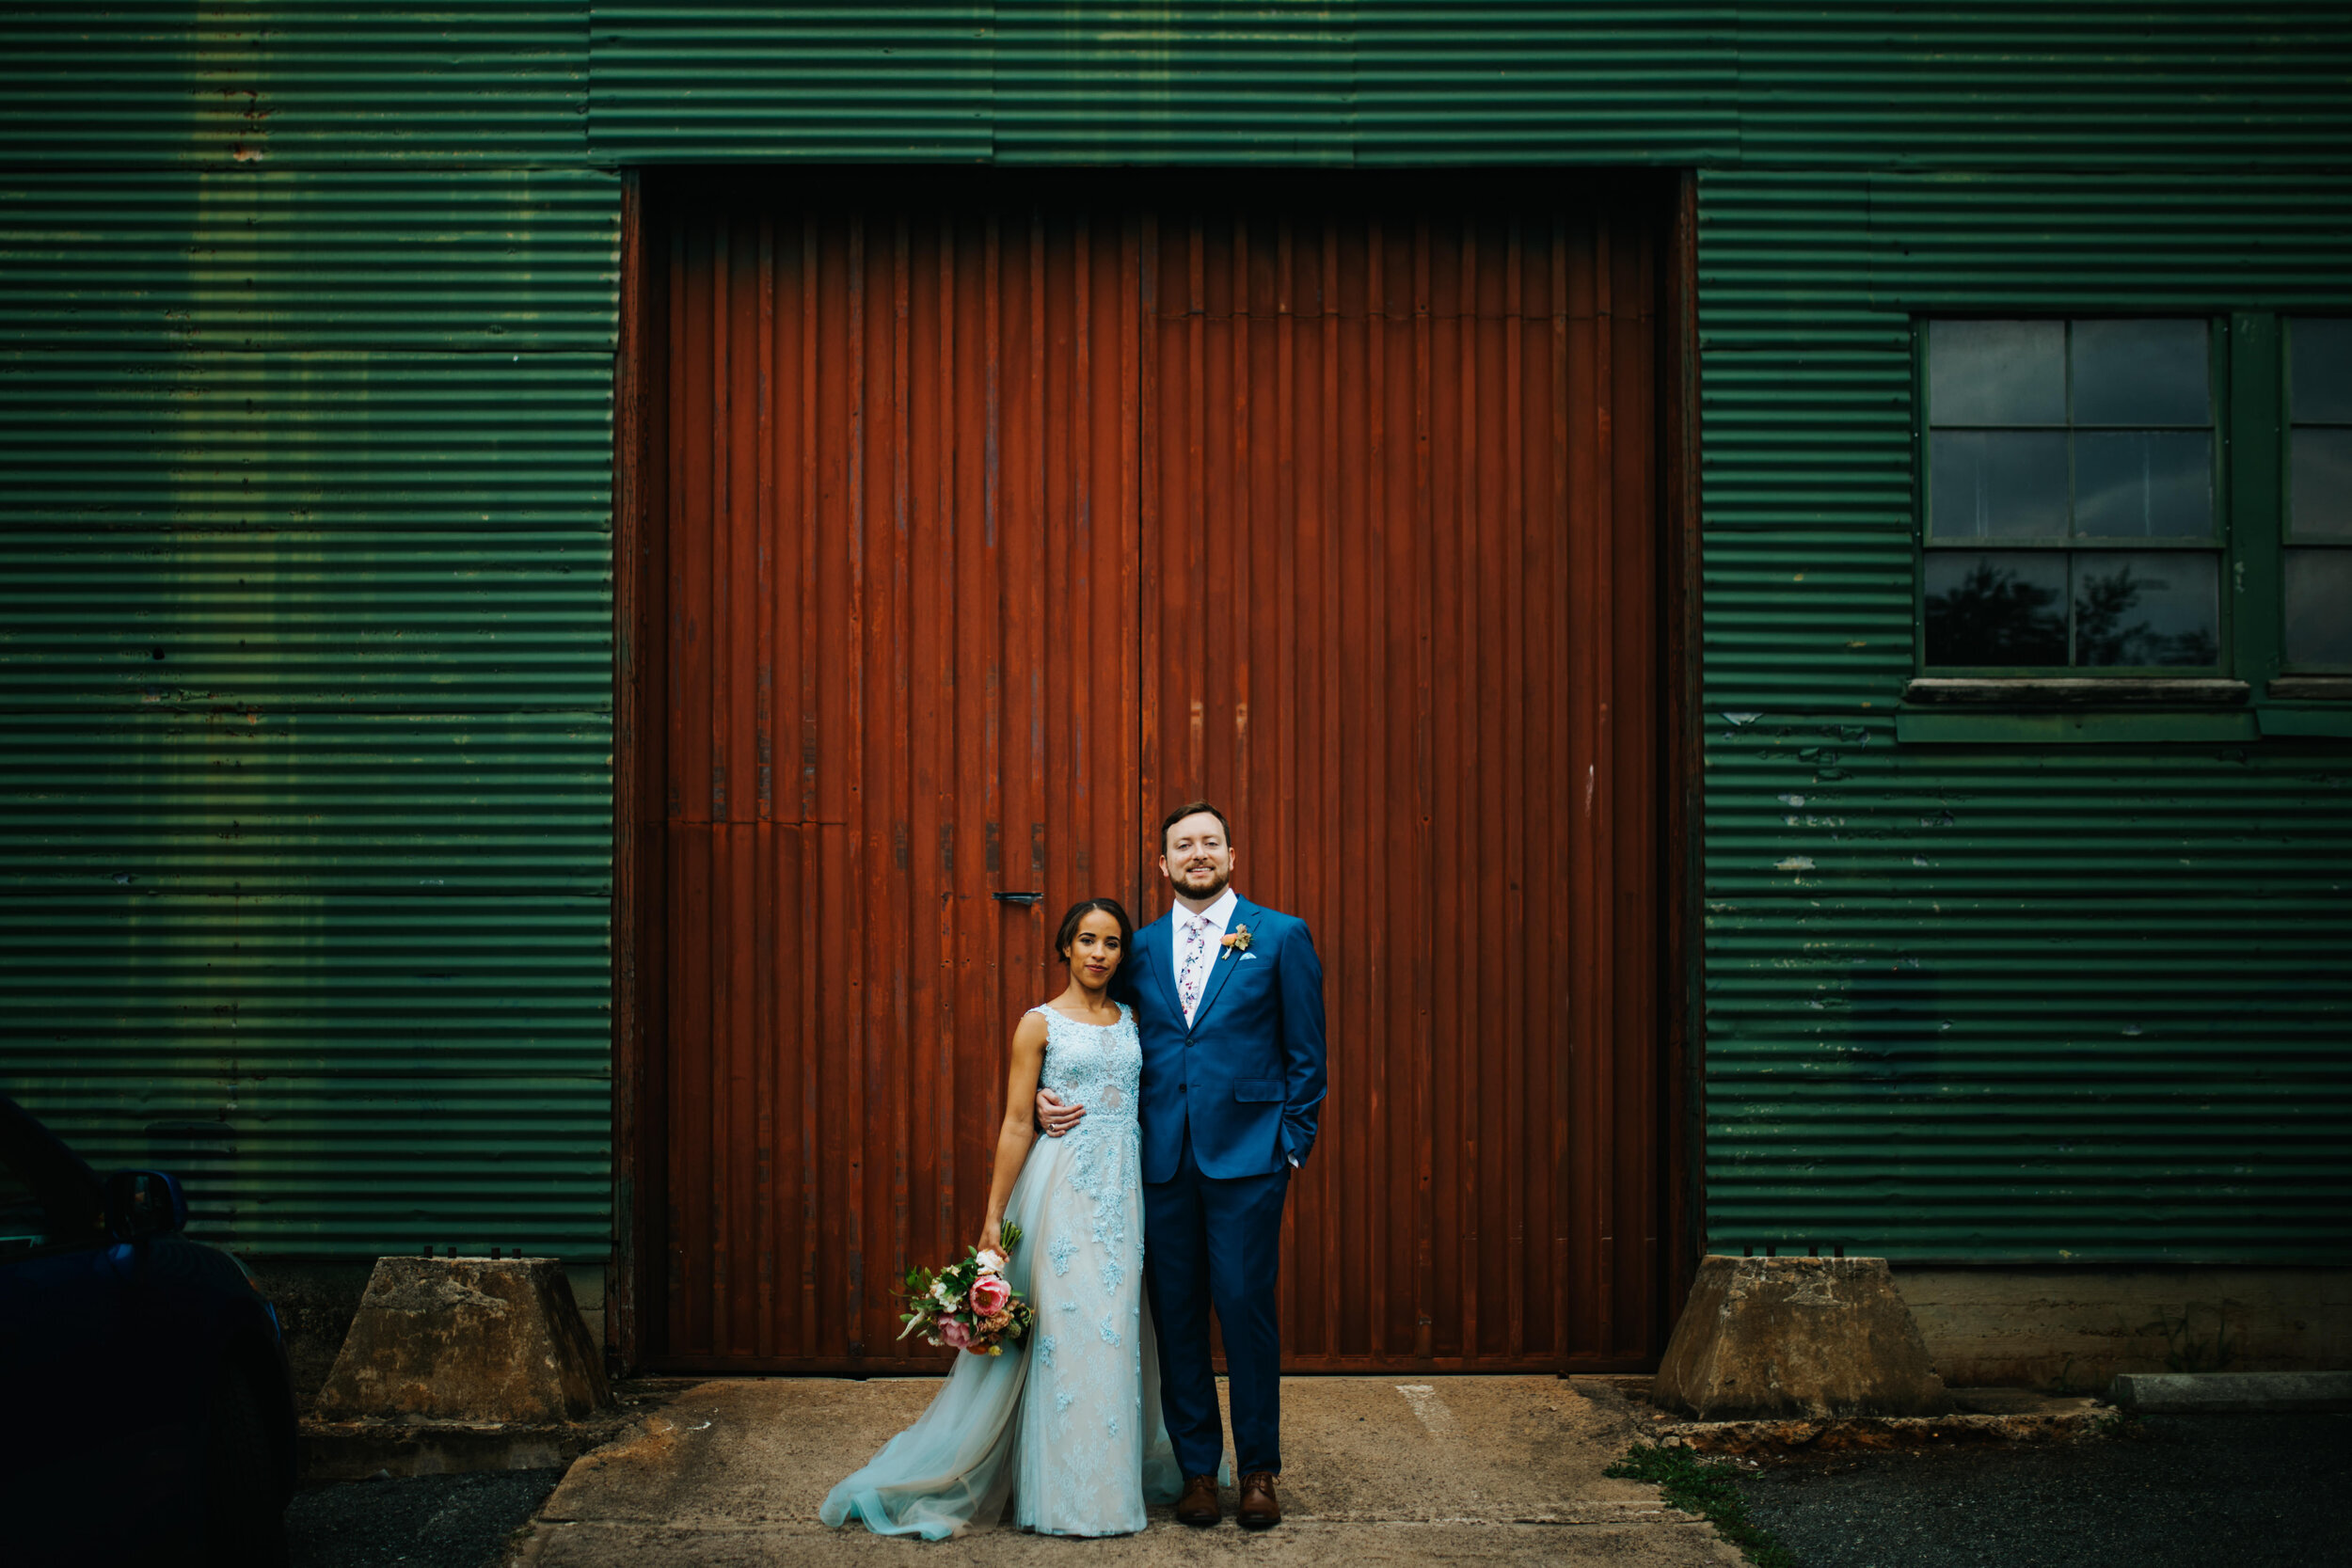 Bride and groom wearing blue posing by a red and green warehouse RVA Shawnee Custalow Queer Wedding Photographer